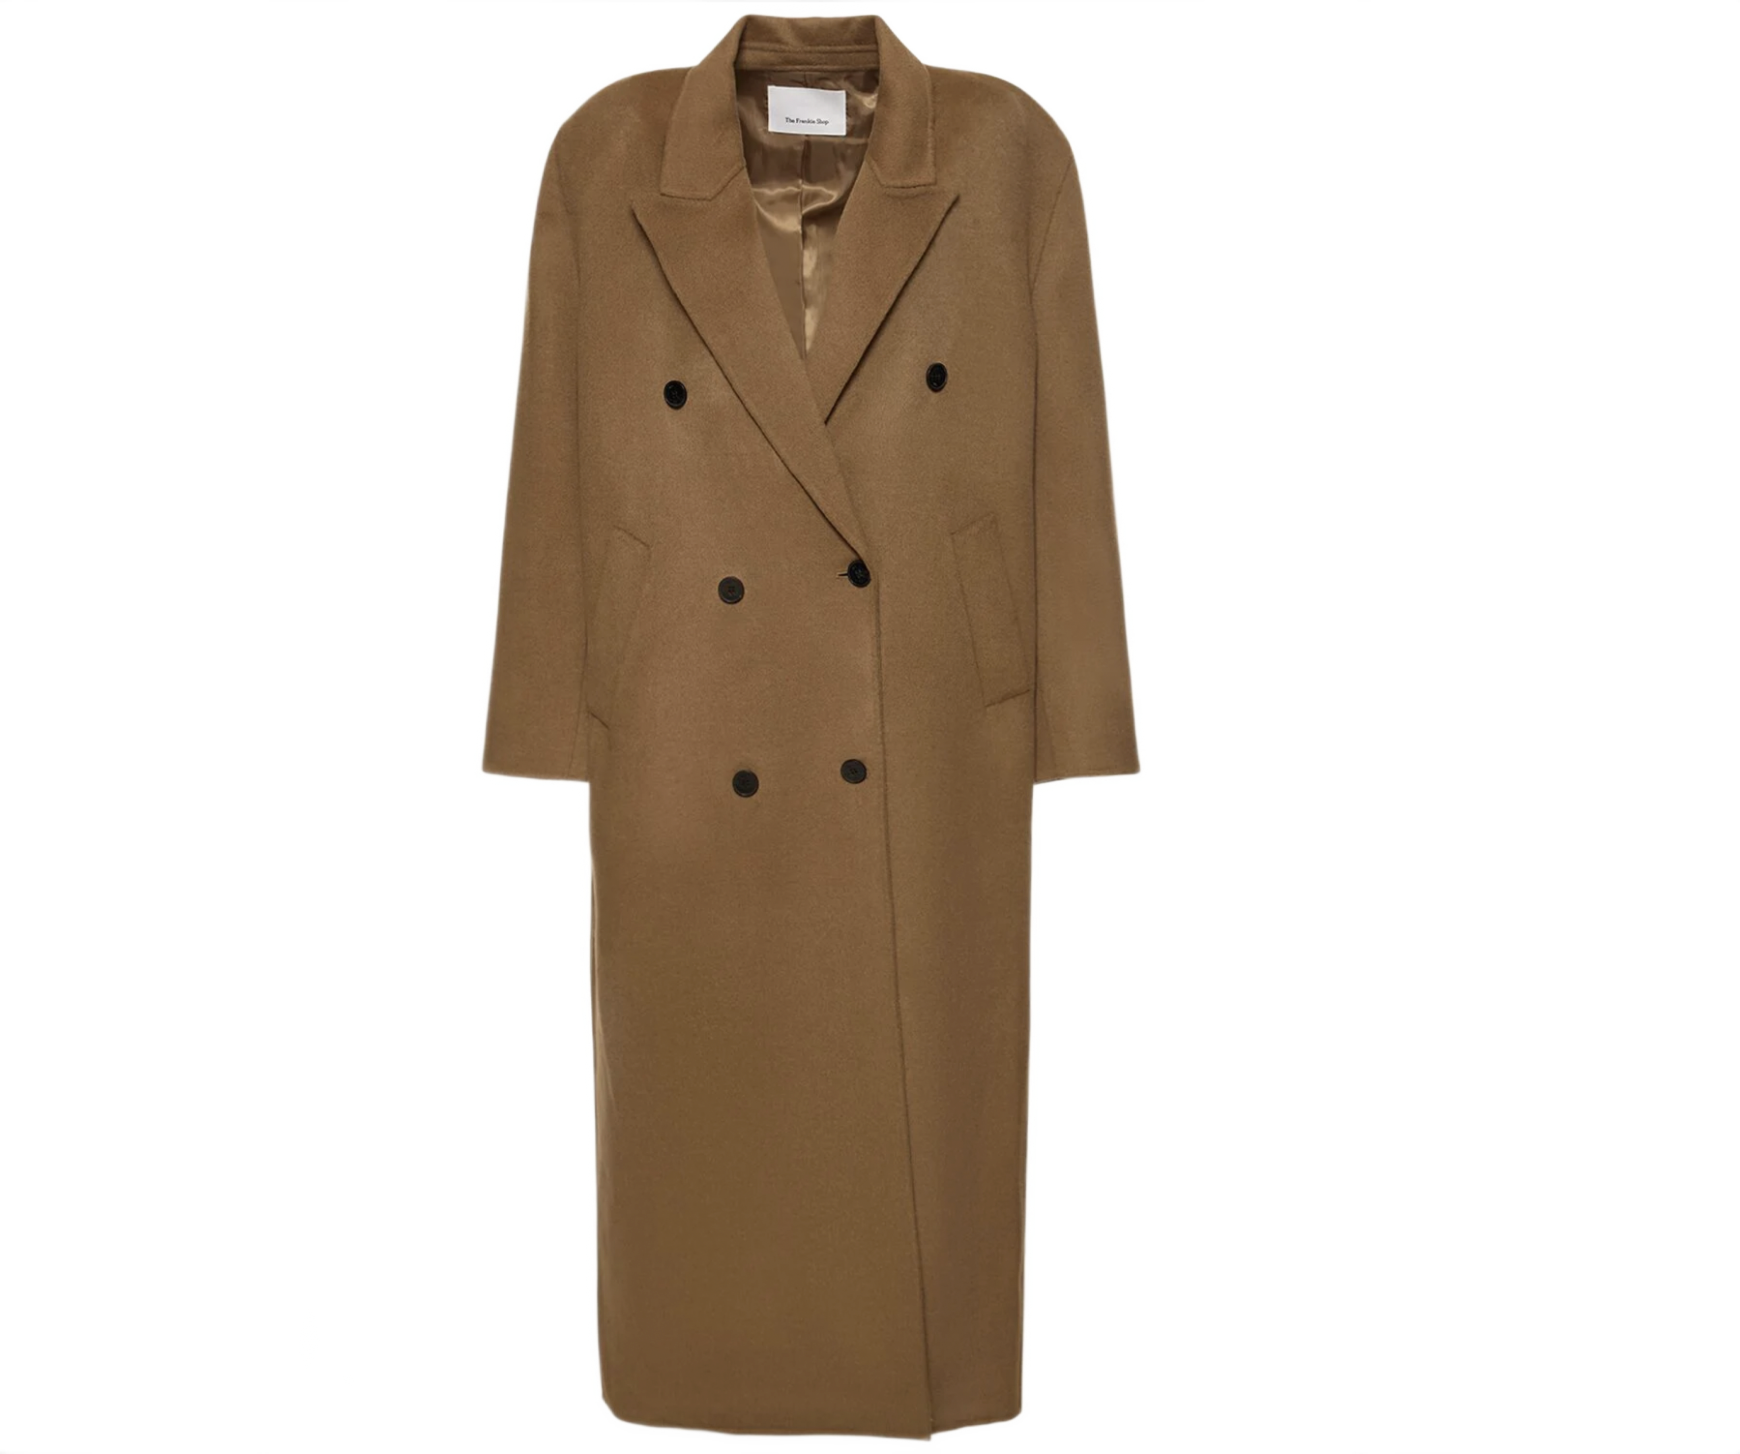 The Frankie Shop Gaia Double-breasted Wool-blend Coat